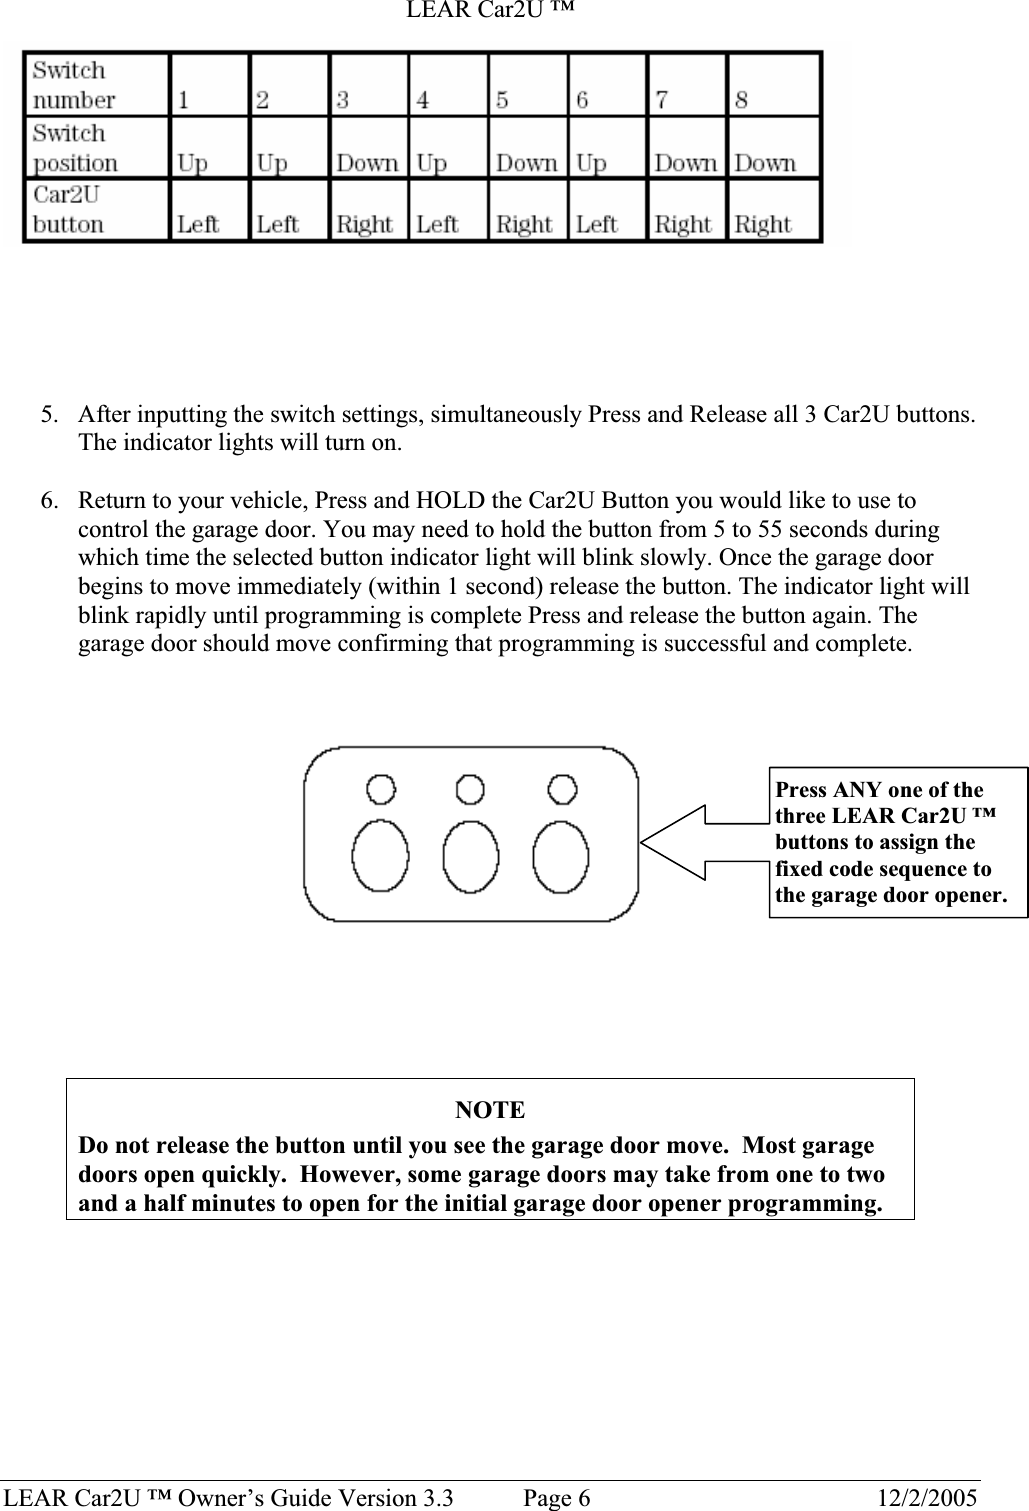 LEAR Car2U ™ LEAR Car2U ™ Owner’s Guide Version 3.3           Page 6  12/2/2005 5. After inputting the switch settings, simultaneously Press and Release all 3 Car2U buttons. The indicator lights will turn on. 6. Return to your vehicle, Press and HOLD the Car2U Button you would like to use to control the garage door. You may need to hold the button from 5 to 55 seconds during which time the selected button indicator light will blink slowly. Once the garage door begins to move immediately (within 1 second) release the button. The indicator light will blink rapidly until programming is complete Press and release the button again. The garage door should move confirming that programming is successful and complete. NOTEDo not release the button until you see the garage door move.  Most garage doors open quickly.  However, some garage doors may take from one to two and a half minutes to open for the initial garage door opener programming. Press ANY one of the three LEAR Car2U ™buttons to assign the fixed code sequence to the garage door opener. 